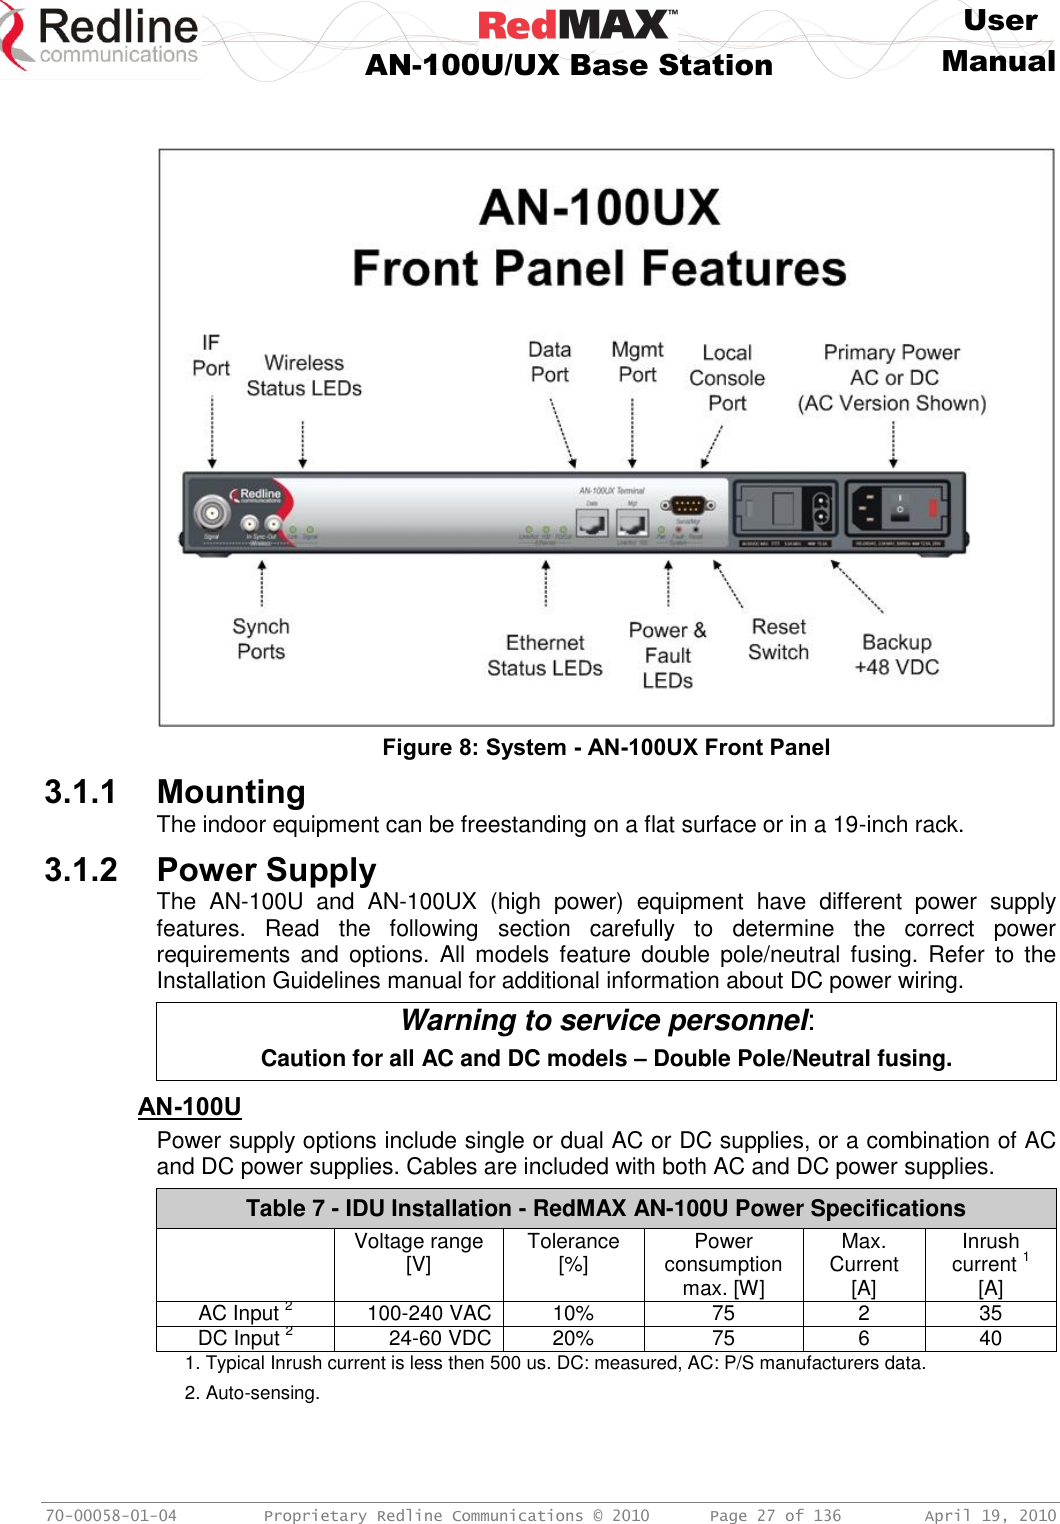     User  AN-100U/UX Base Station Manual   70-00058-01-04  Proprietary Redline Communications © 2010   Page 27 of 136  April 19, 2010    Figure 8: System - AN-100UX Front Panel 3.1.1 Mounting The indoor equipment can be freestanding on a flat surface or in a 19-inch rack. 3.1.2 Power Supply The  AN-100U  and  AN-100UX  (high  power)  equipment  have  different  power  supply features.  Read  the  following  section  carefully  to  determine  the  correct  power requirements and  options.  All  models  feature  double  pole/neutral  fusing. Refer  to  the Installation Guidelines manual for additional information about DC power wiring. Warning to service personnel: Caution for all AC and DC models – Double Pole/Neutral fusing.  AN-100U Power supply options include single or dual AC or DC supplies, or a combination of AC and DC power supplies. Cables are included with both AC and DC power supplies. Table 7 - IDU Installation - RedMAX AN-100U Power Specifications  Voltage range [V] Tolerance [%] Power consumption max. [W] Max. Current [A] Inrush current 1 [A] AC Input 2 100-240 VAC 10% 75 2 35 DC Input 2 24-60 VDC 20% 75 6 40 1. Typical Inrush current is less then 500 us. DC: measured, AC: P/S manufacturers data. 2. Auto-sensing.  